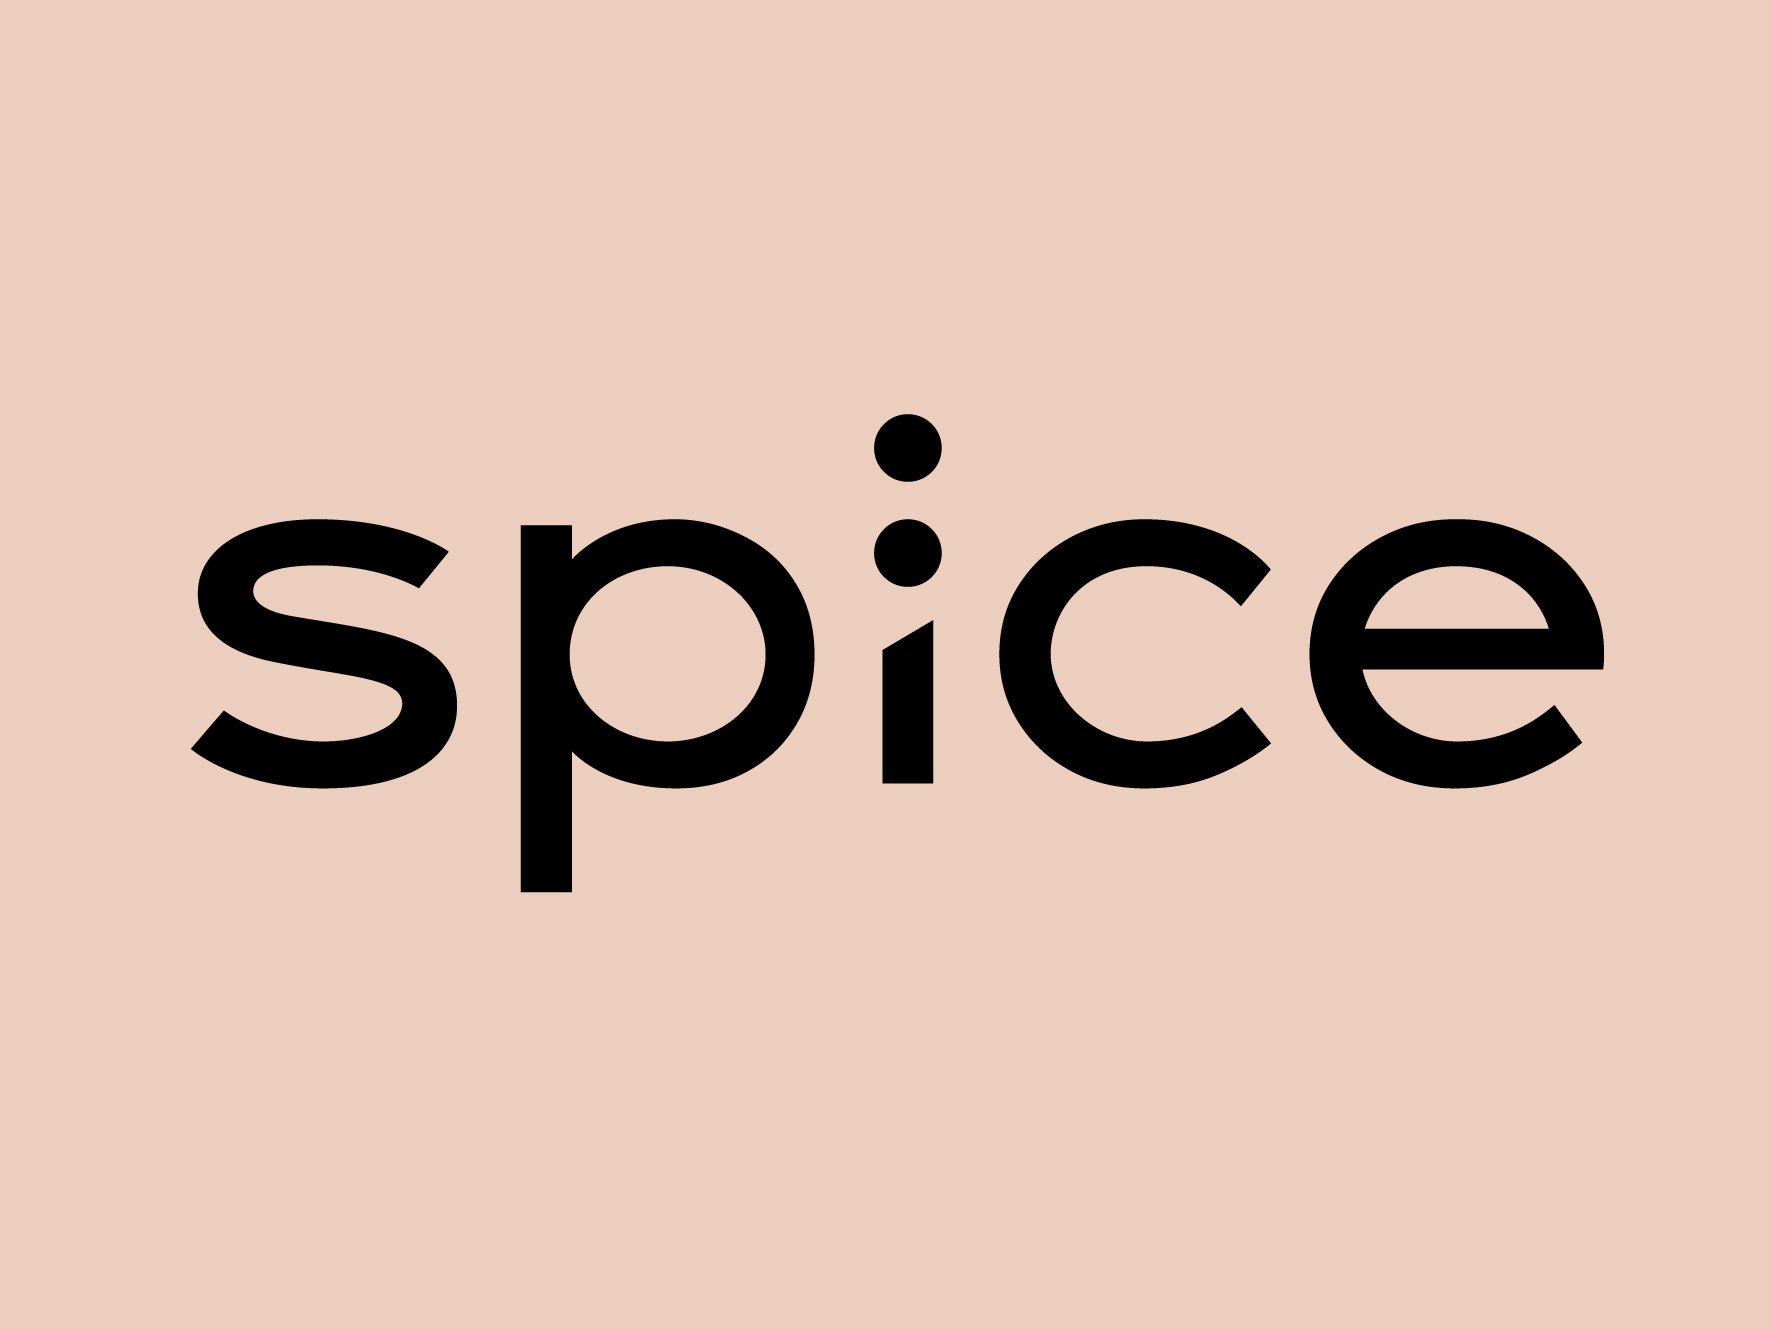 Spice shopping center expands its technology segment